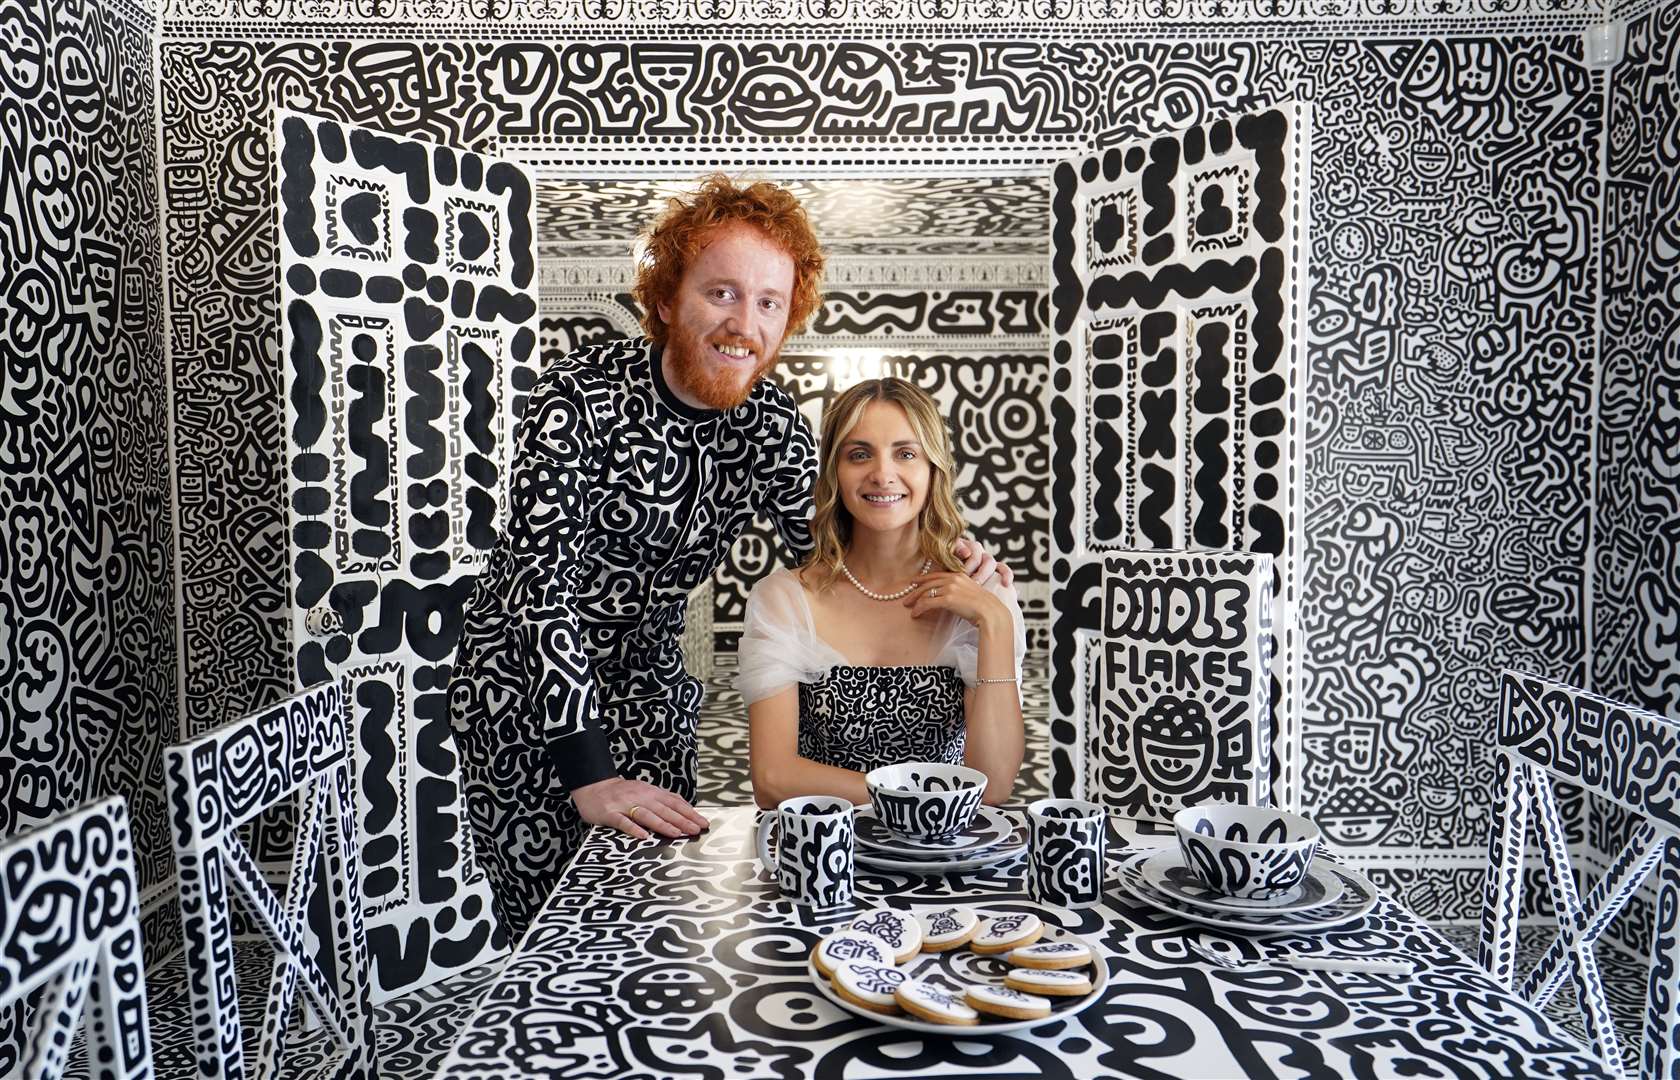 Sam Cox, aka Mr Doodle, with his wife Alena in the Doodle House (Gareth Fuller/PA)